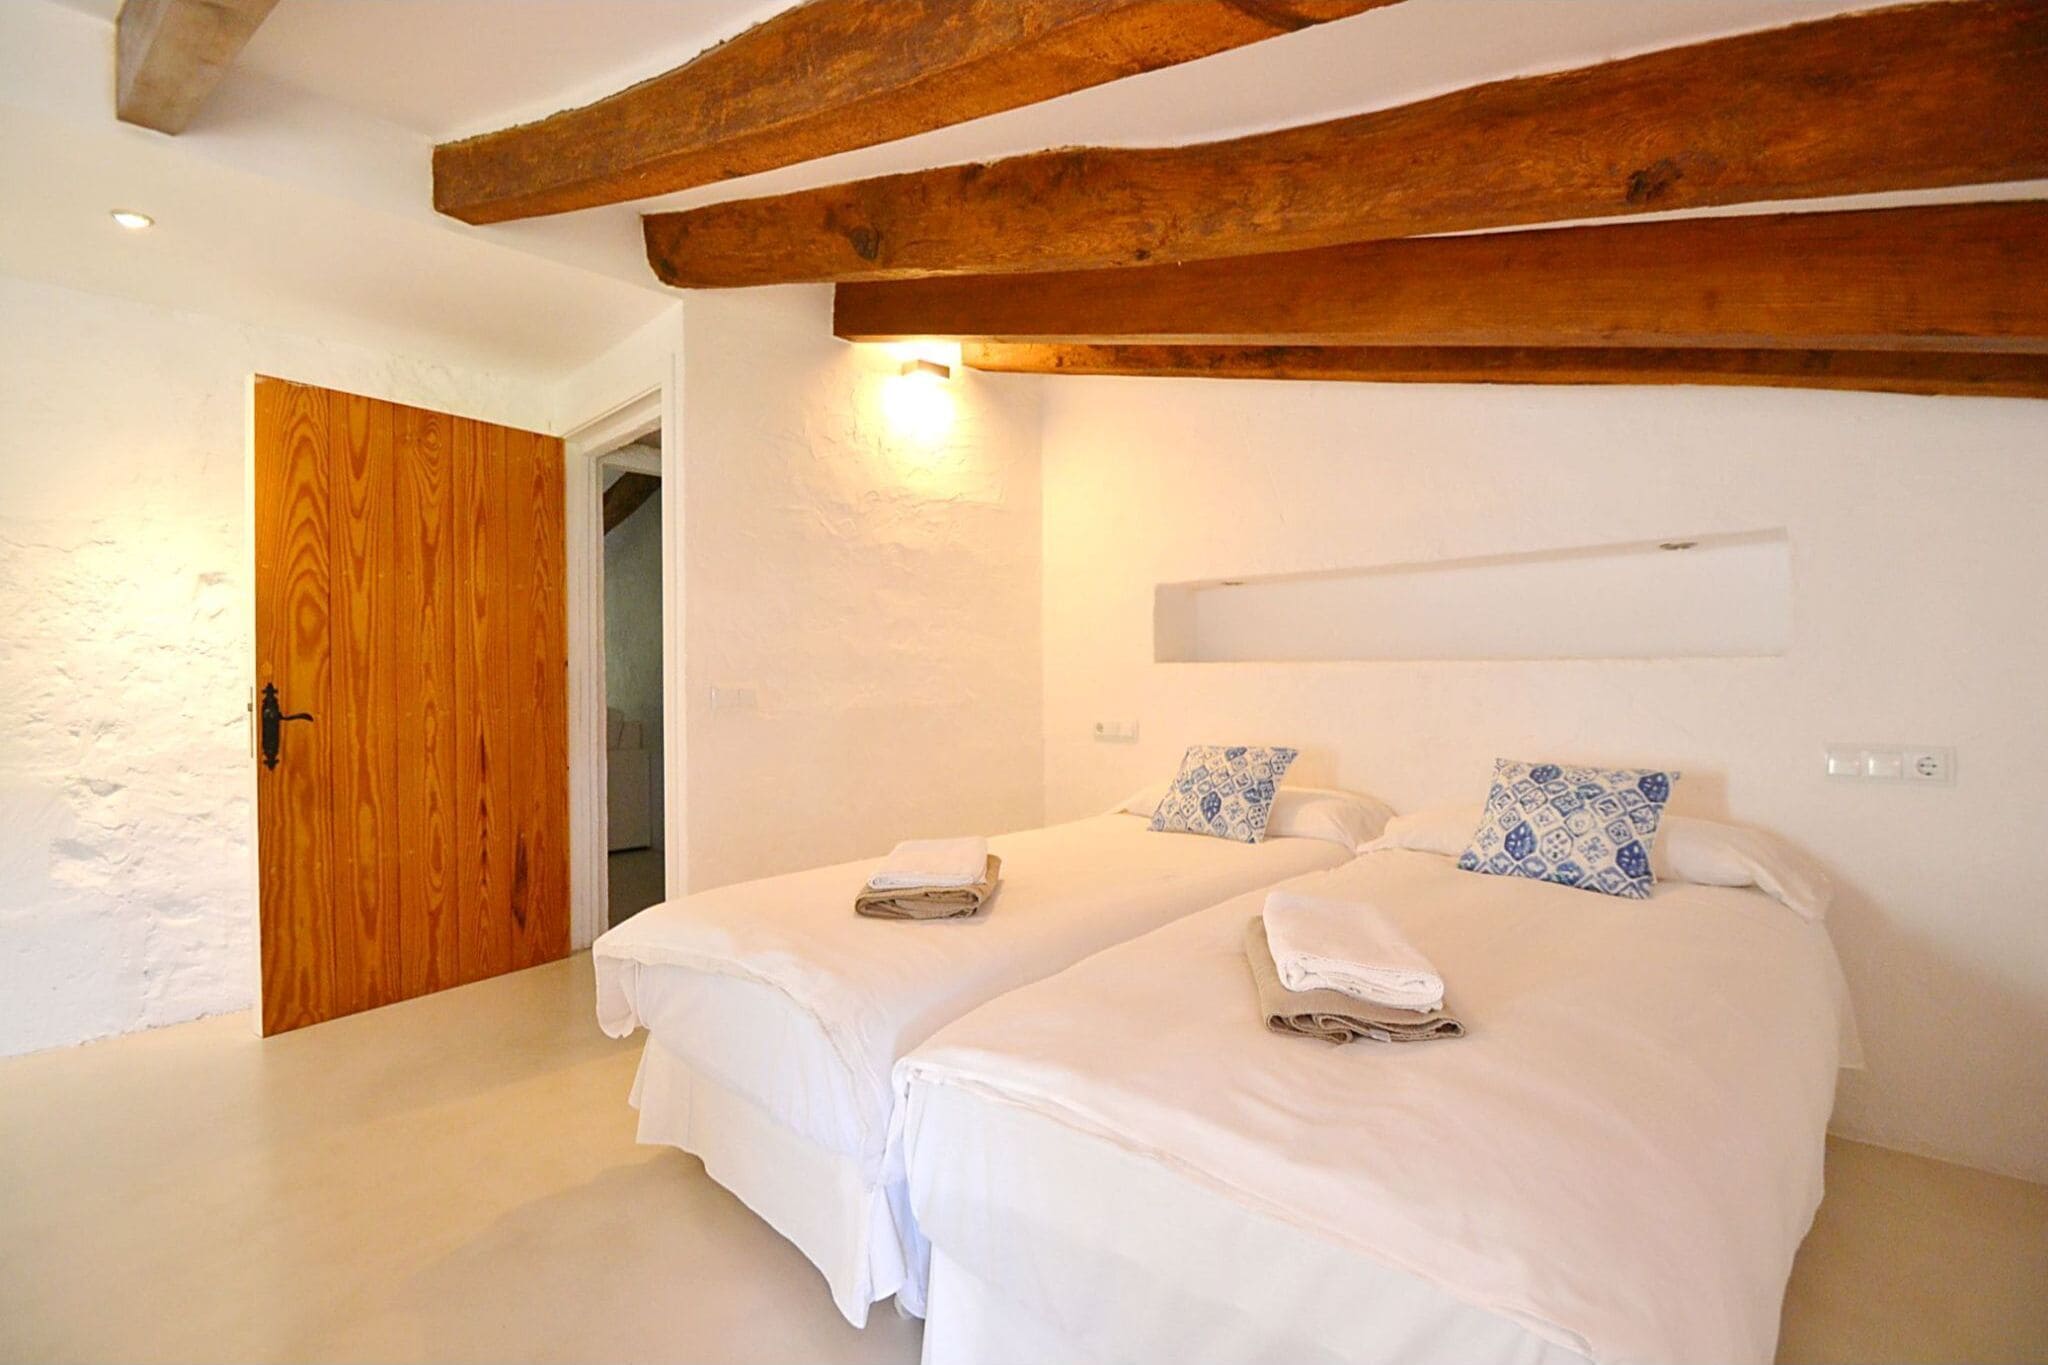 Luxuriously renovated Mallorcan country house for 10 pax